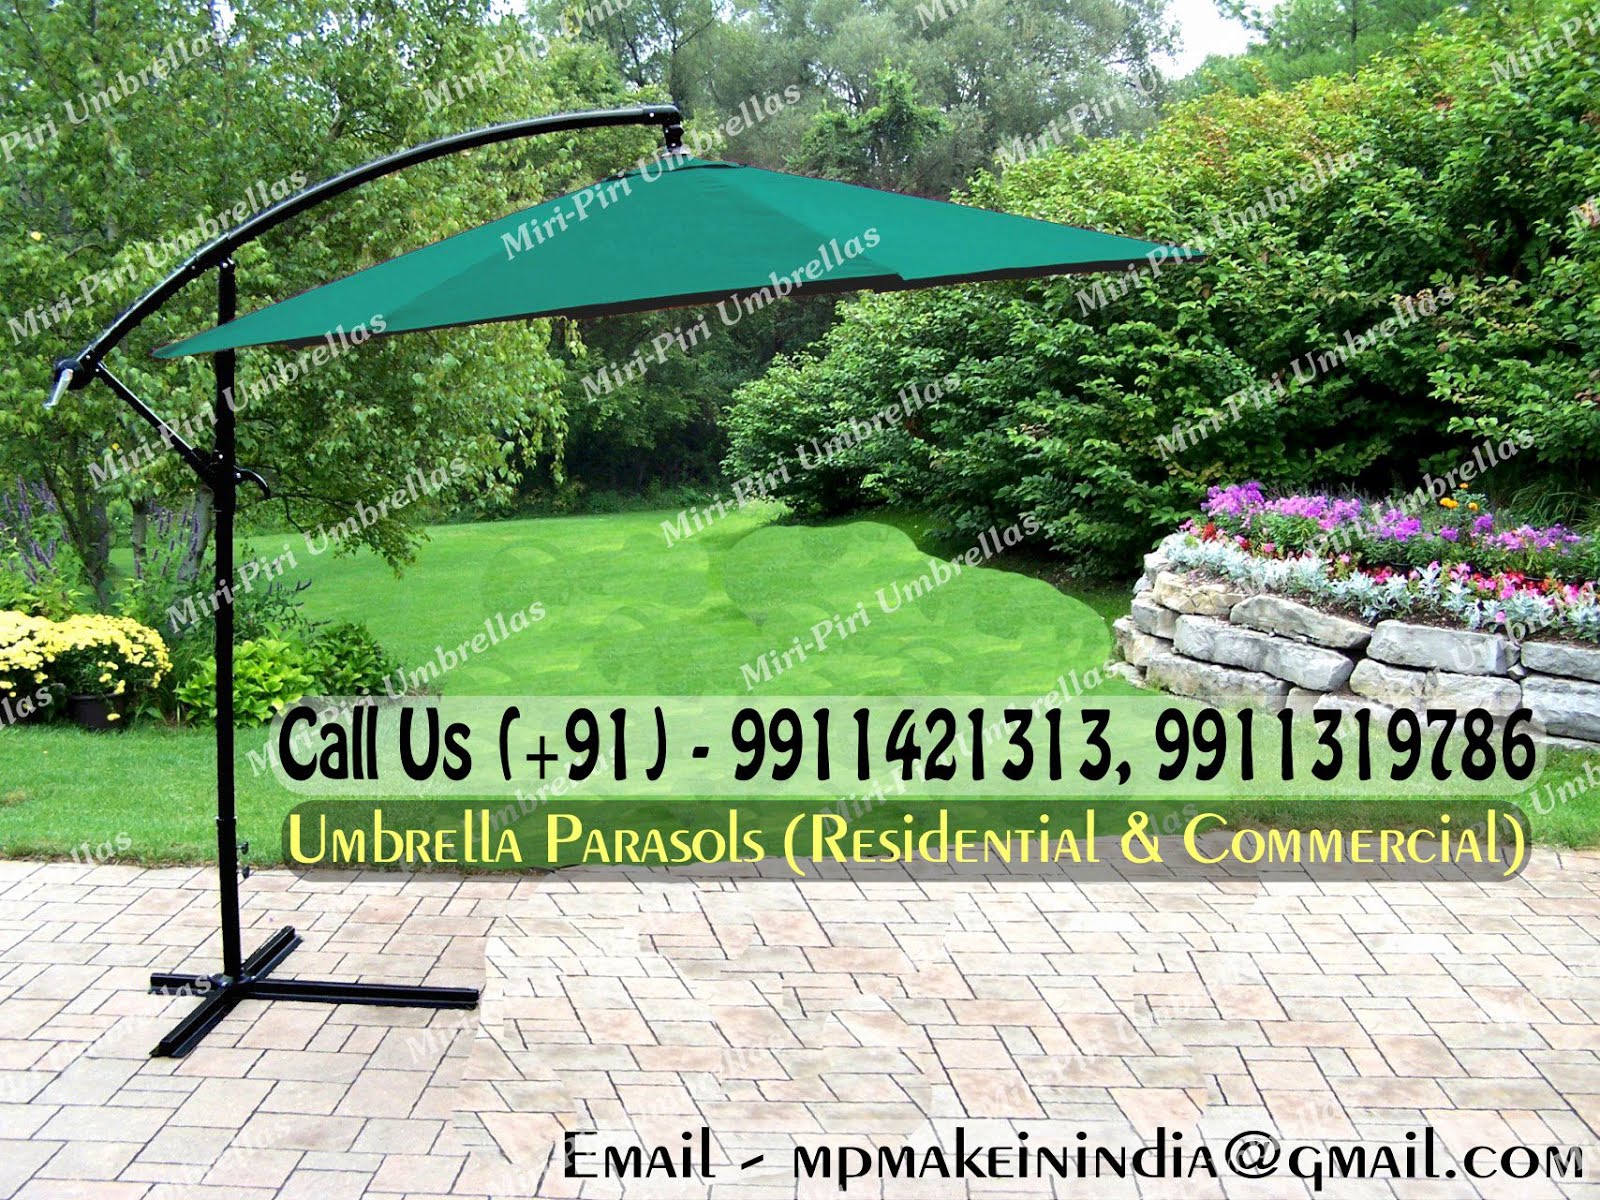 Cantilever Umbrella Manufacturers, Suppliers & Wholesalers in Delhi, Supply all Over India